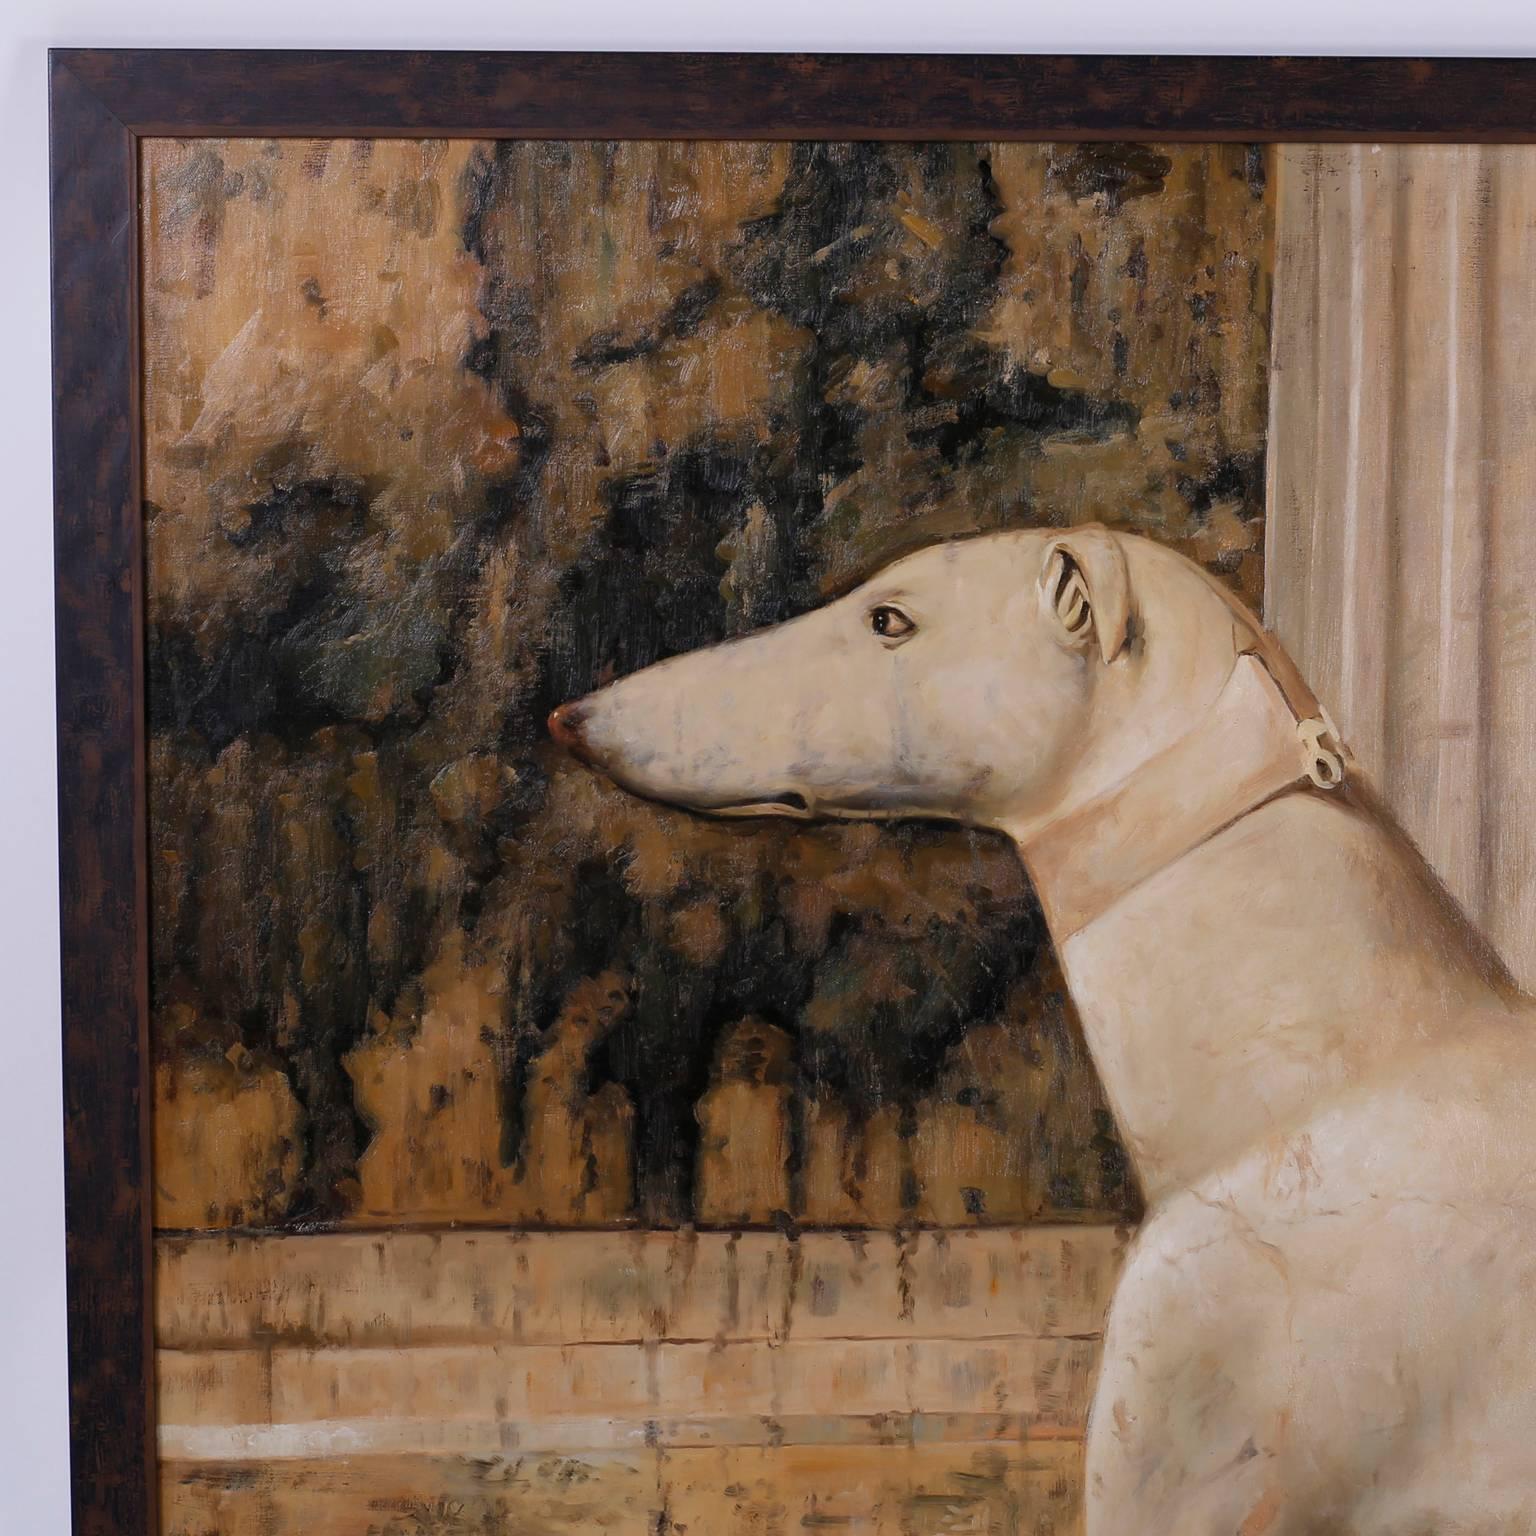 Mysterious oil painting on canvas of two greyhounds in a state of calm repose set against a classical back round. The black and white dogs facing in opposite directions have a Yin-Yang energy flow and contemplative mood with a nostalgic presence